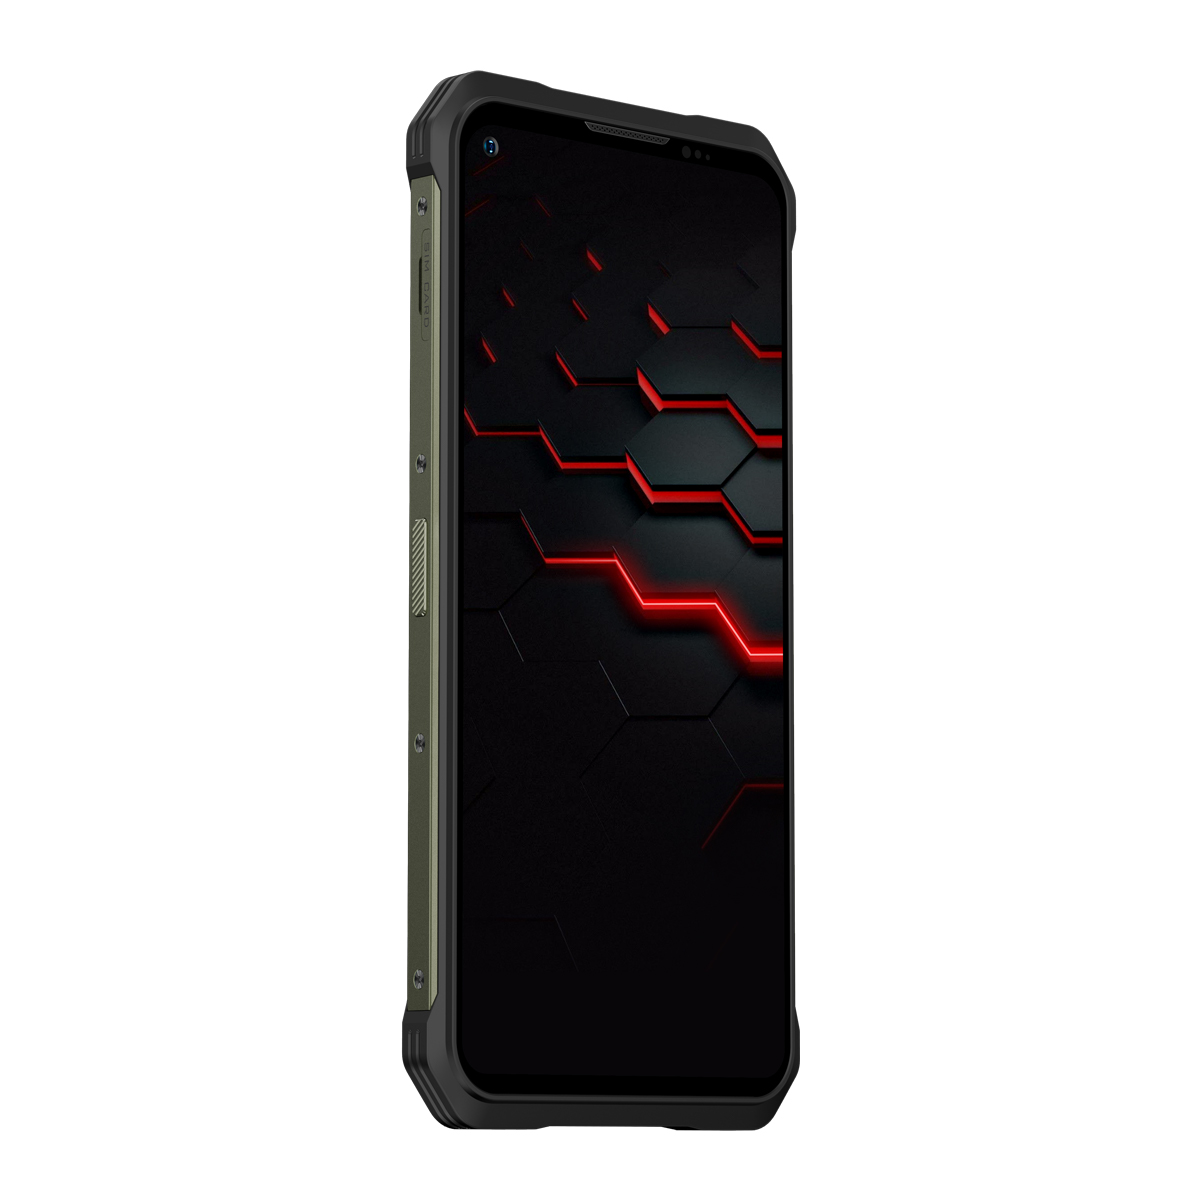 Find DOOGEE V10 Global Bands Dual 5G IP68 IP69K 8GB 128GB Dimensity 700 NFC Android 11 8500mAh 6 39 inch 48MP AI Triple Camera Octa Core Rugged Smartphone for Sale on Gipsybee.com with cryptocurrencies